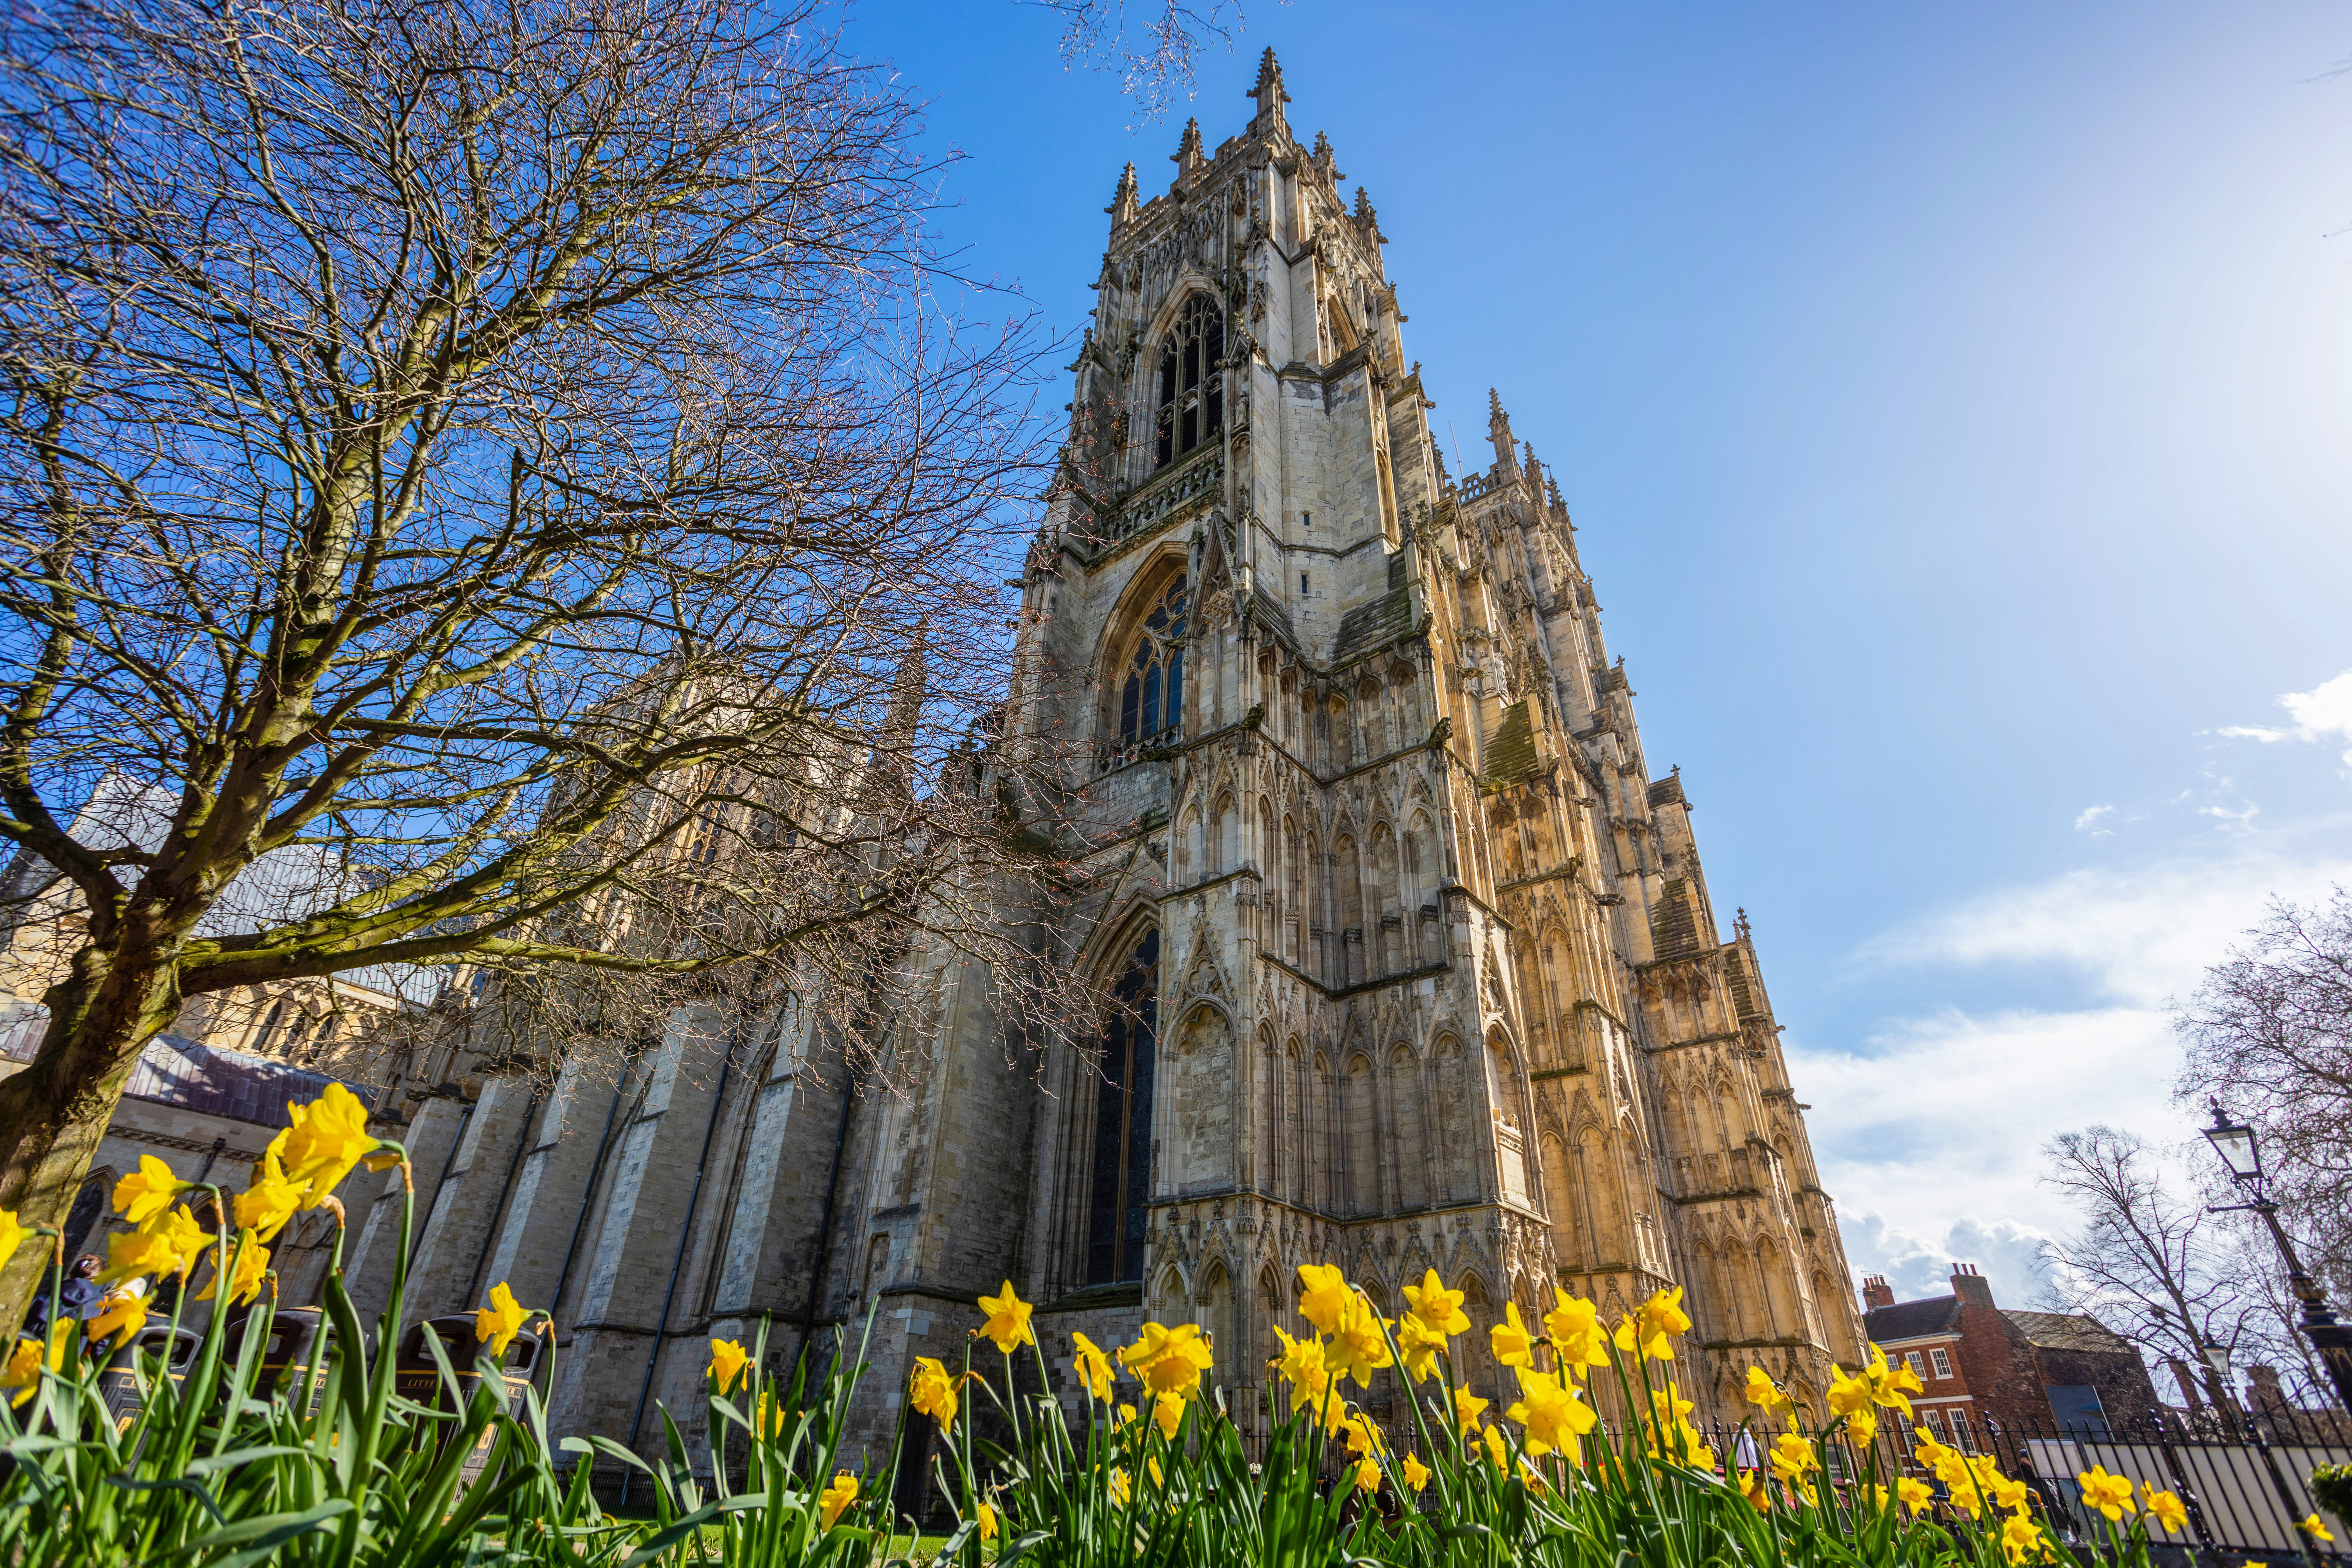 Feeling Blooming Marvellous - UK's Top Spring Scenes To Boost Wellbeing Revealed